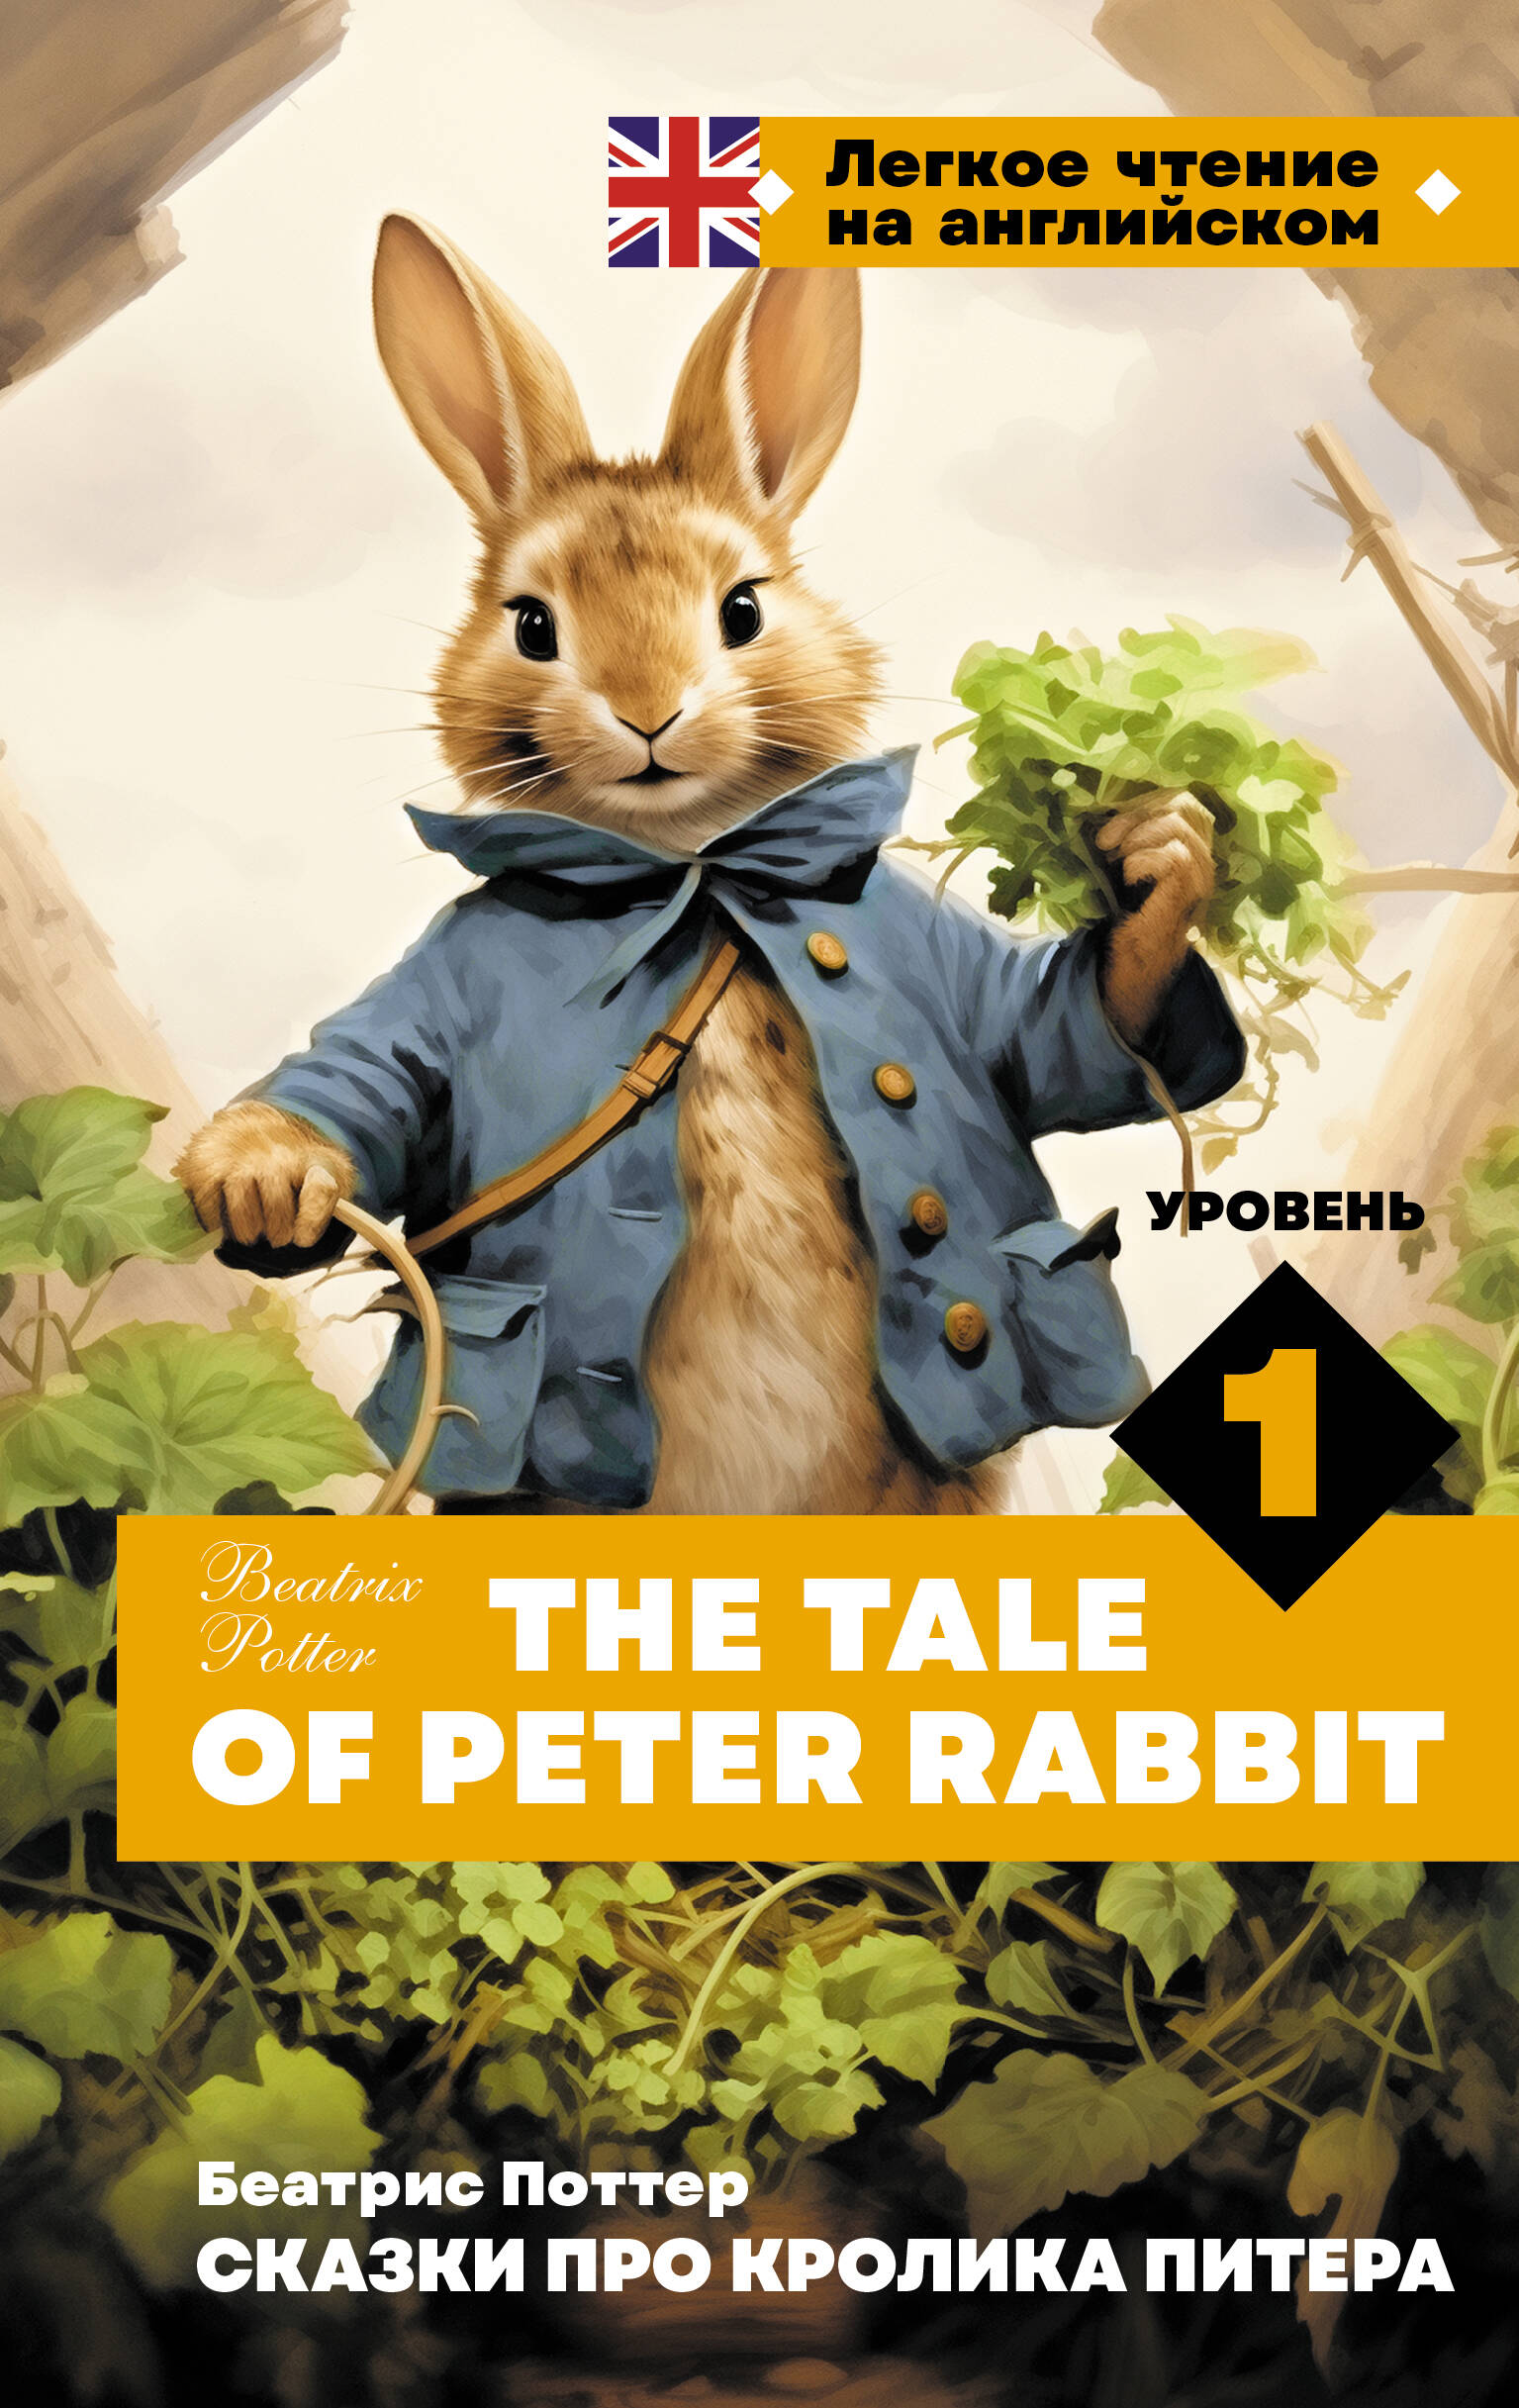    .  1 = The Tale of Peter Rabbit